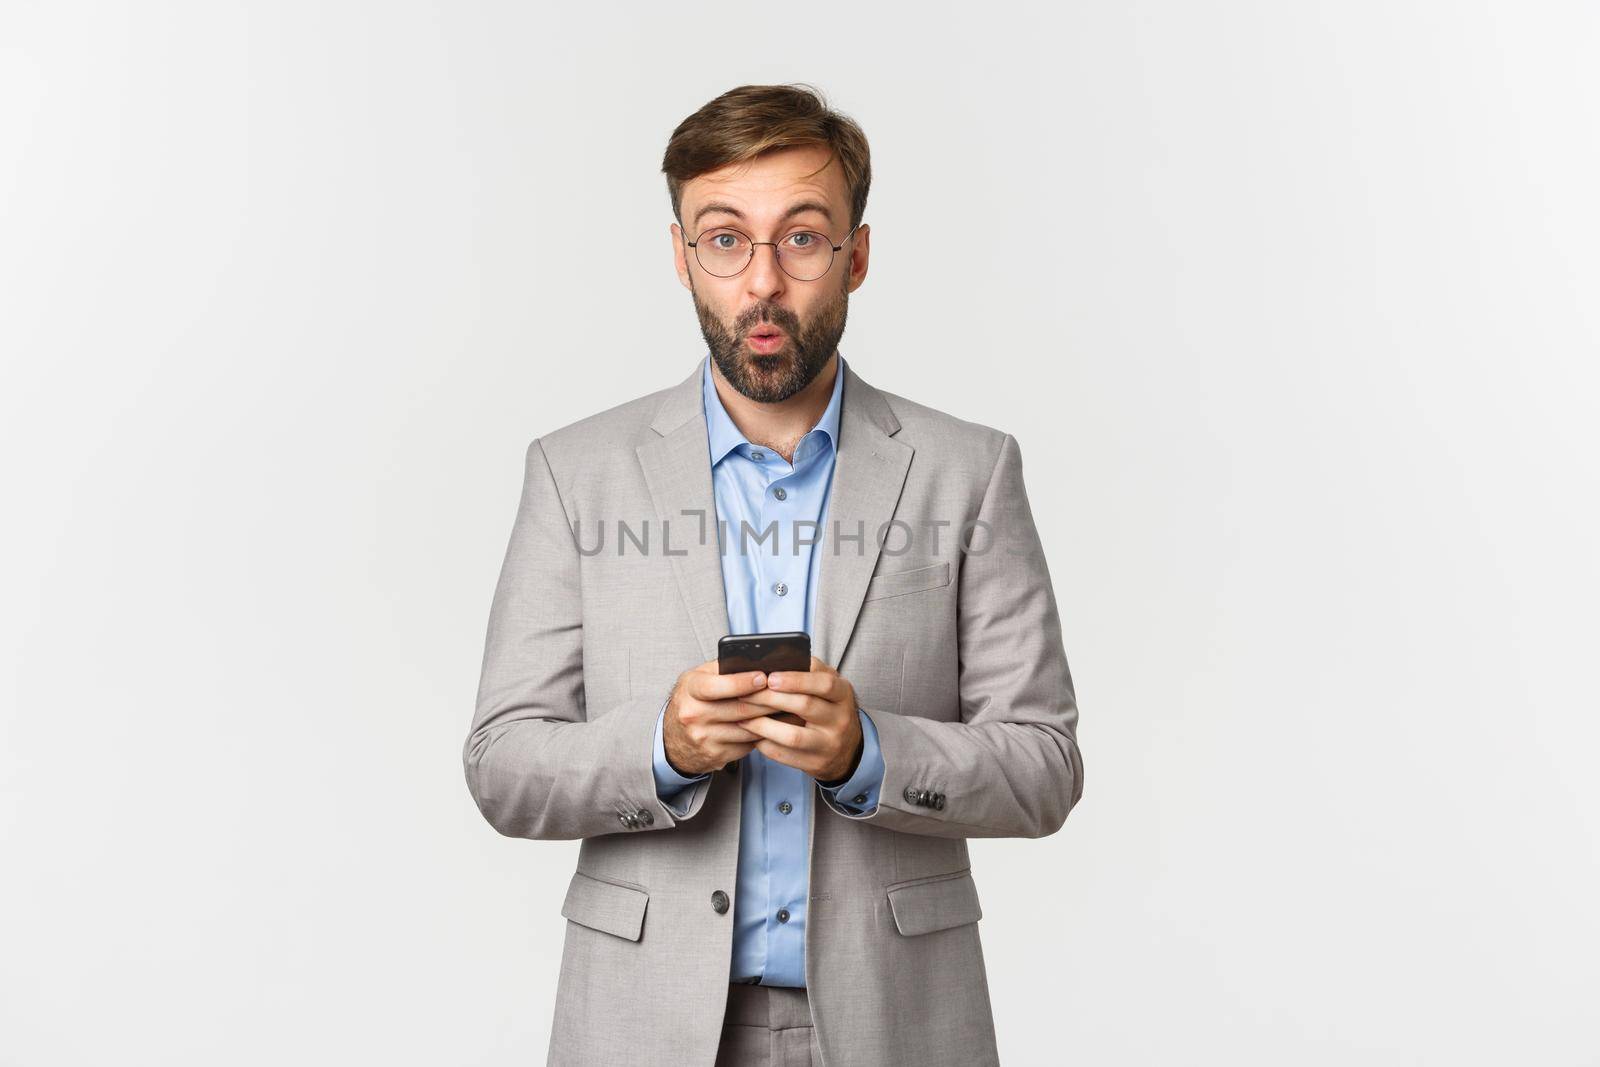 Portrait of handsome businessman with beard, wearing grey suit and glasses, looking amused after reading something interesting on mobile phone, standing over white background.